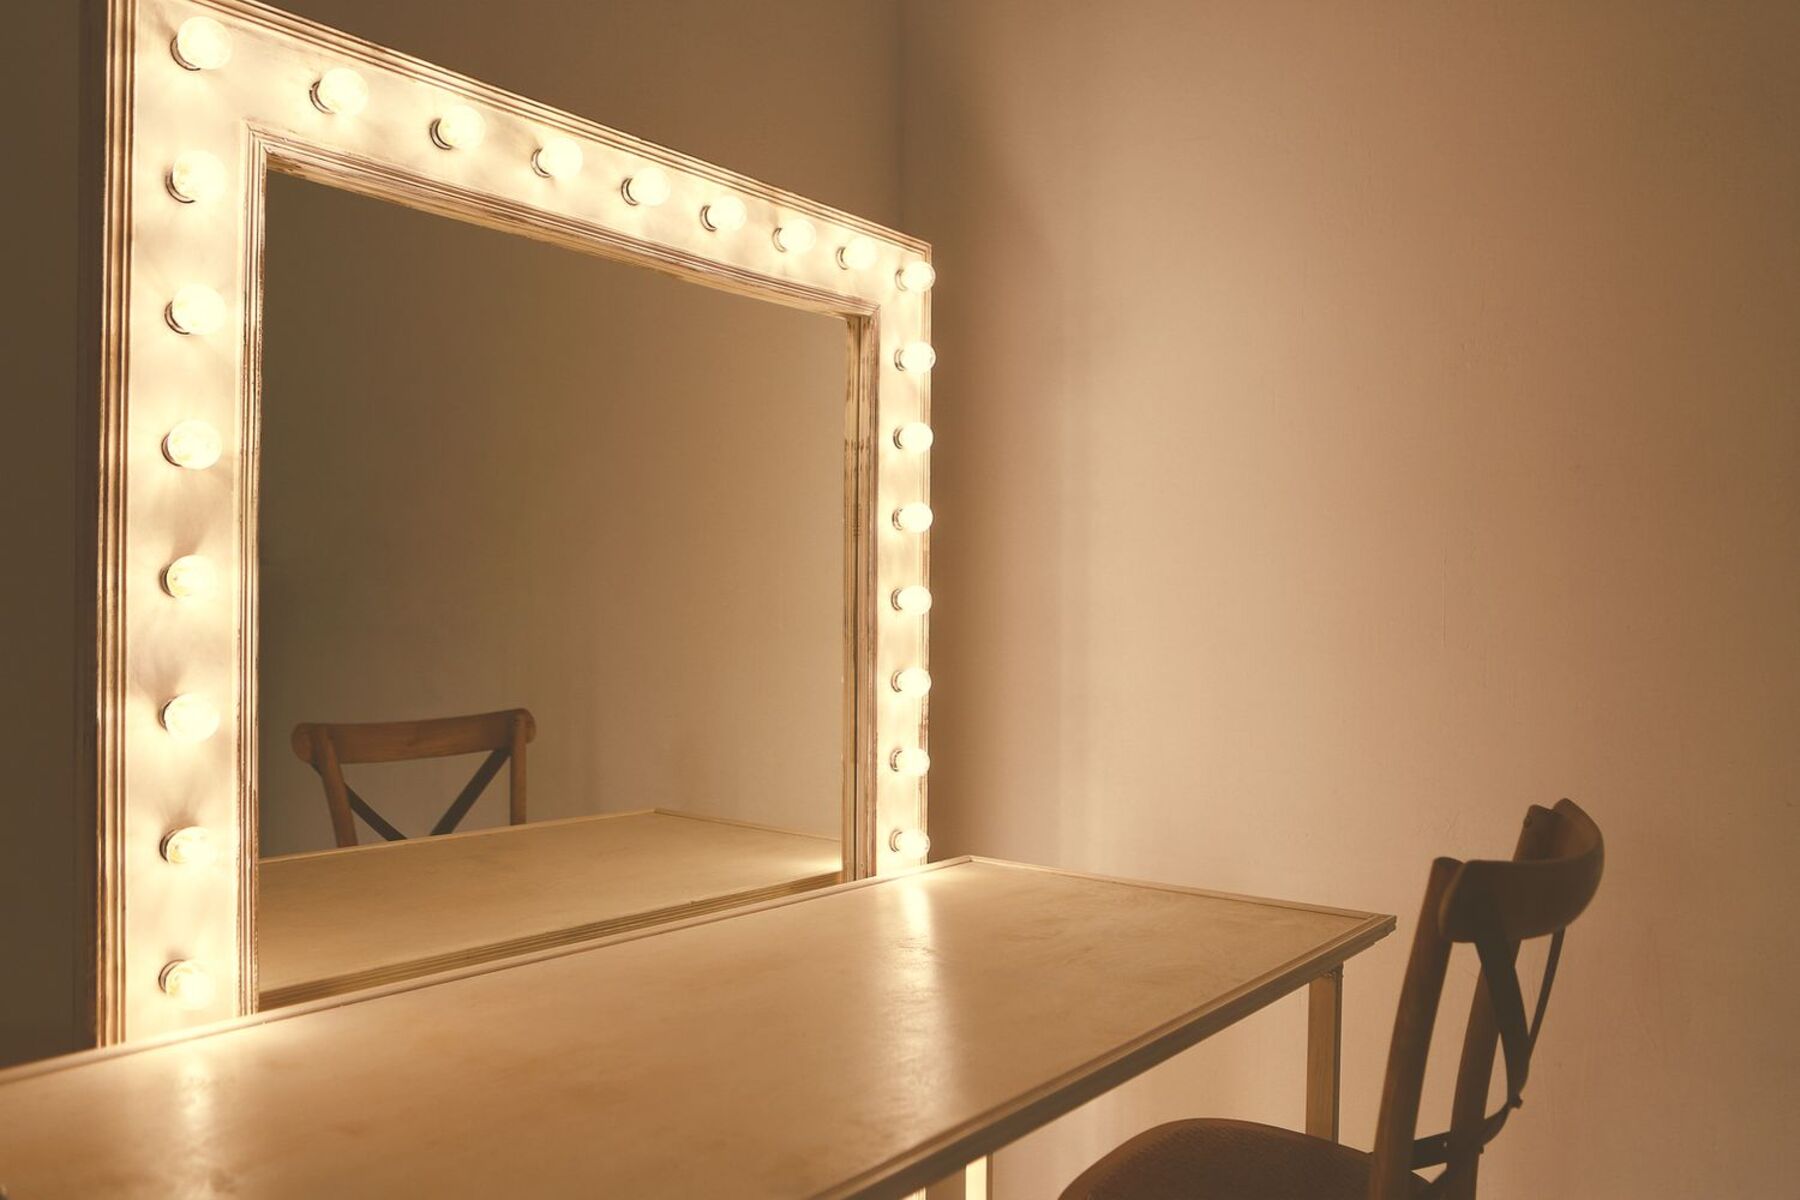 How To Make A Vanity Mirror